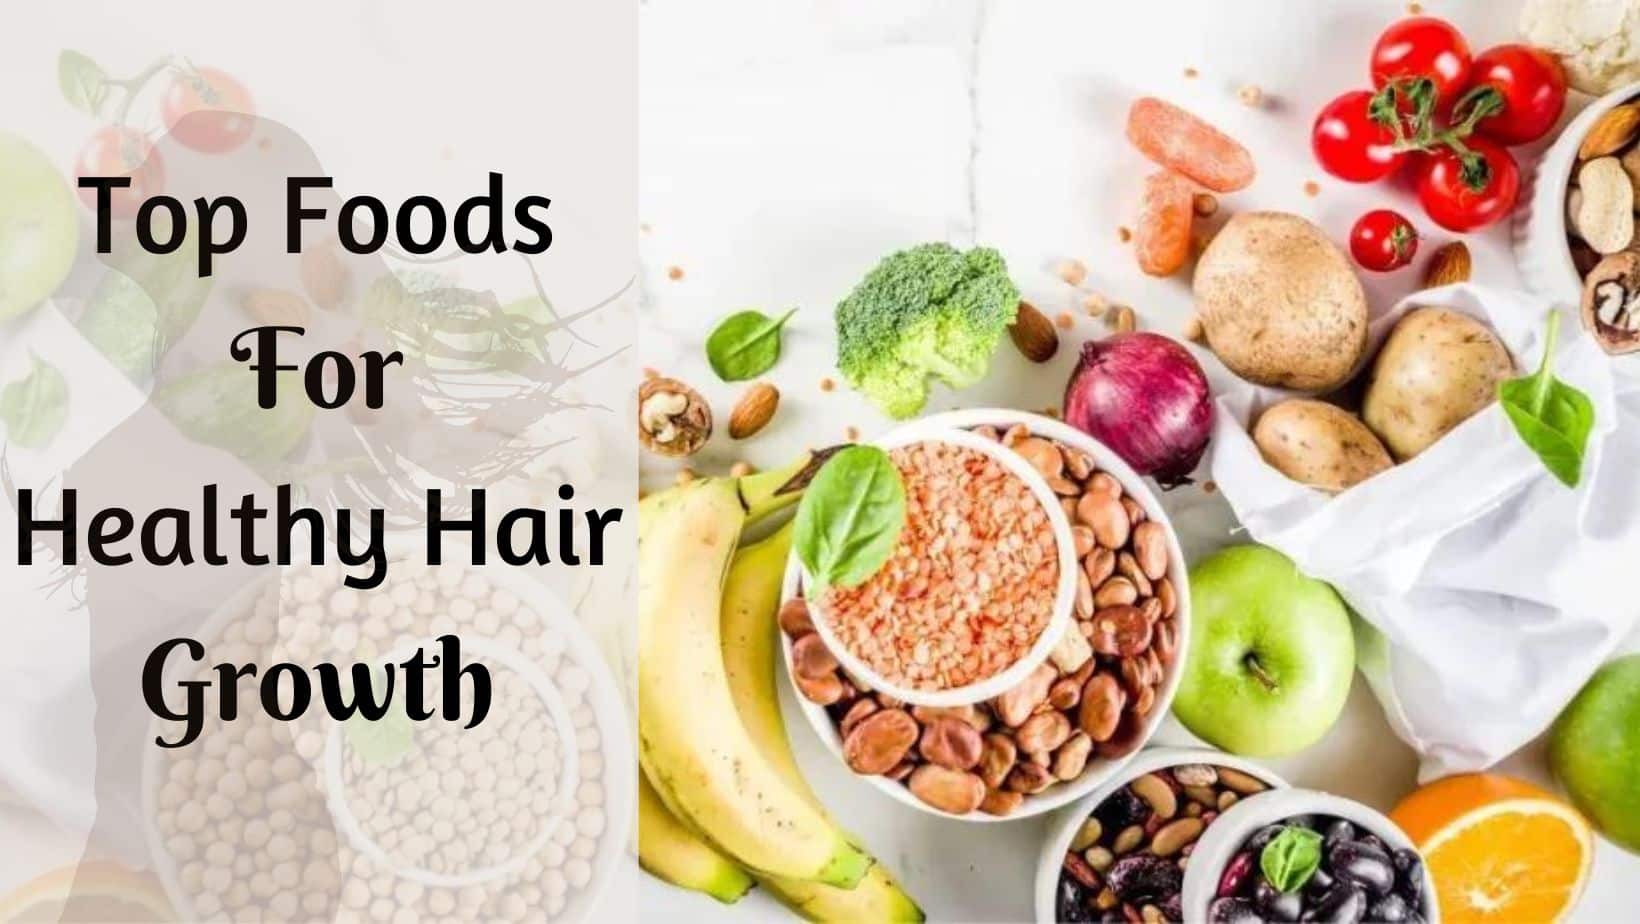 What is the best diet plan for hair regrowth? - Quora